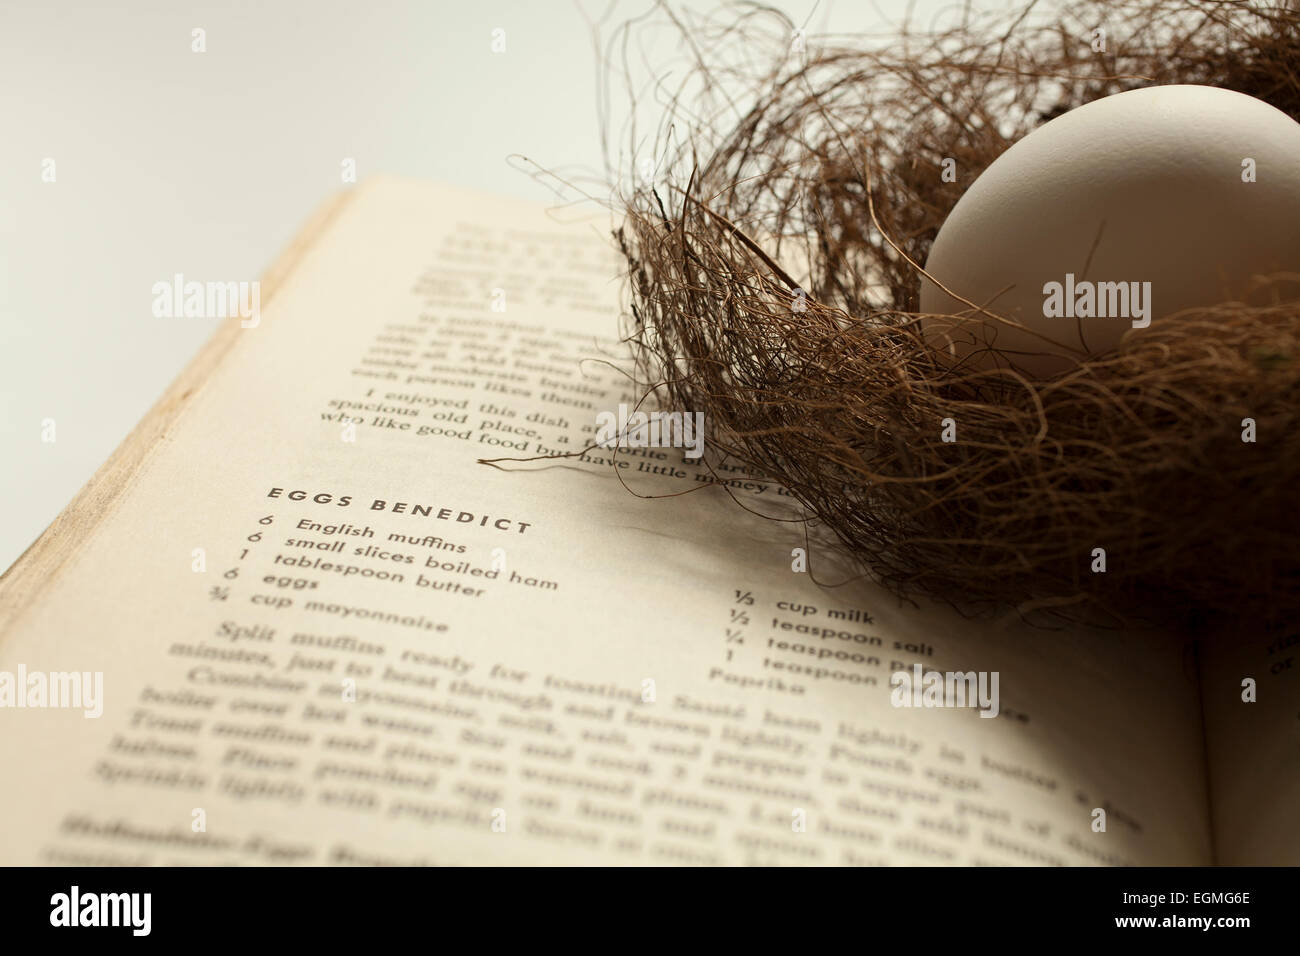 An egg in a delicate bird nest rests on a cookbook opened to a recipe for scrambled eggs. Stock Photo